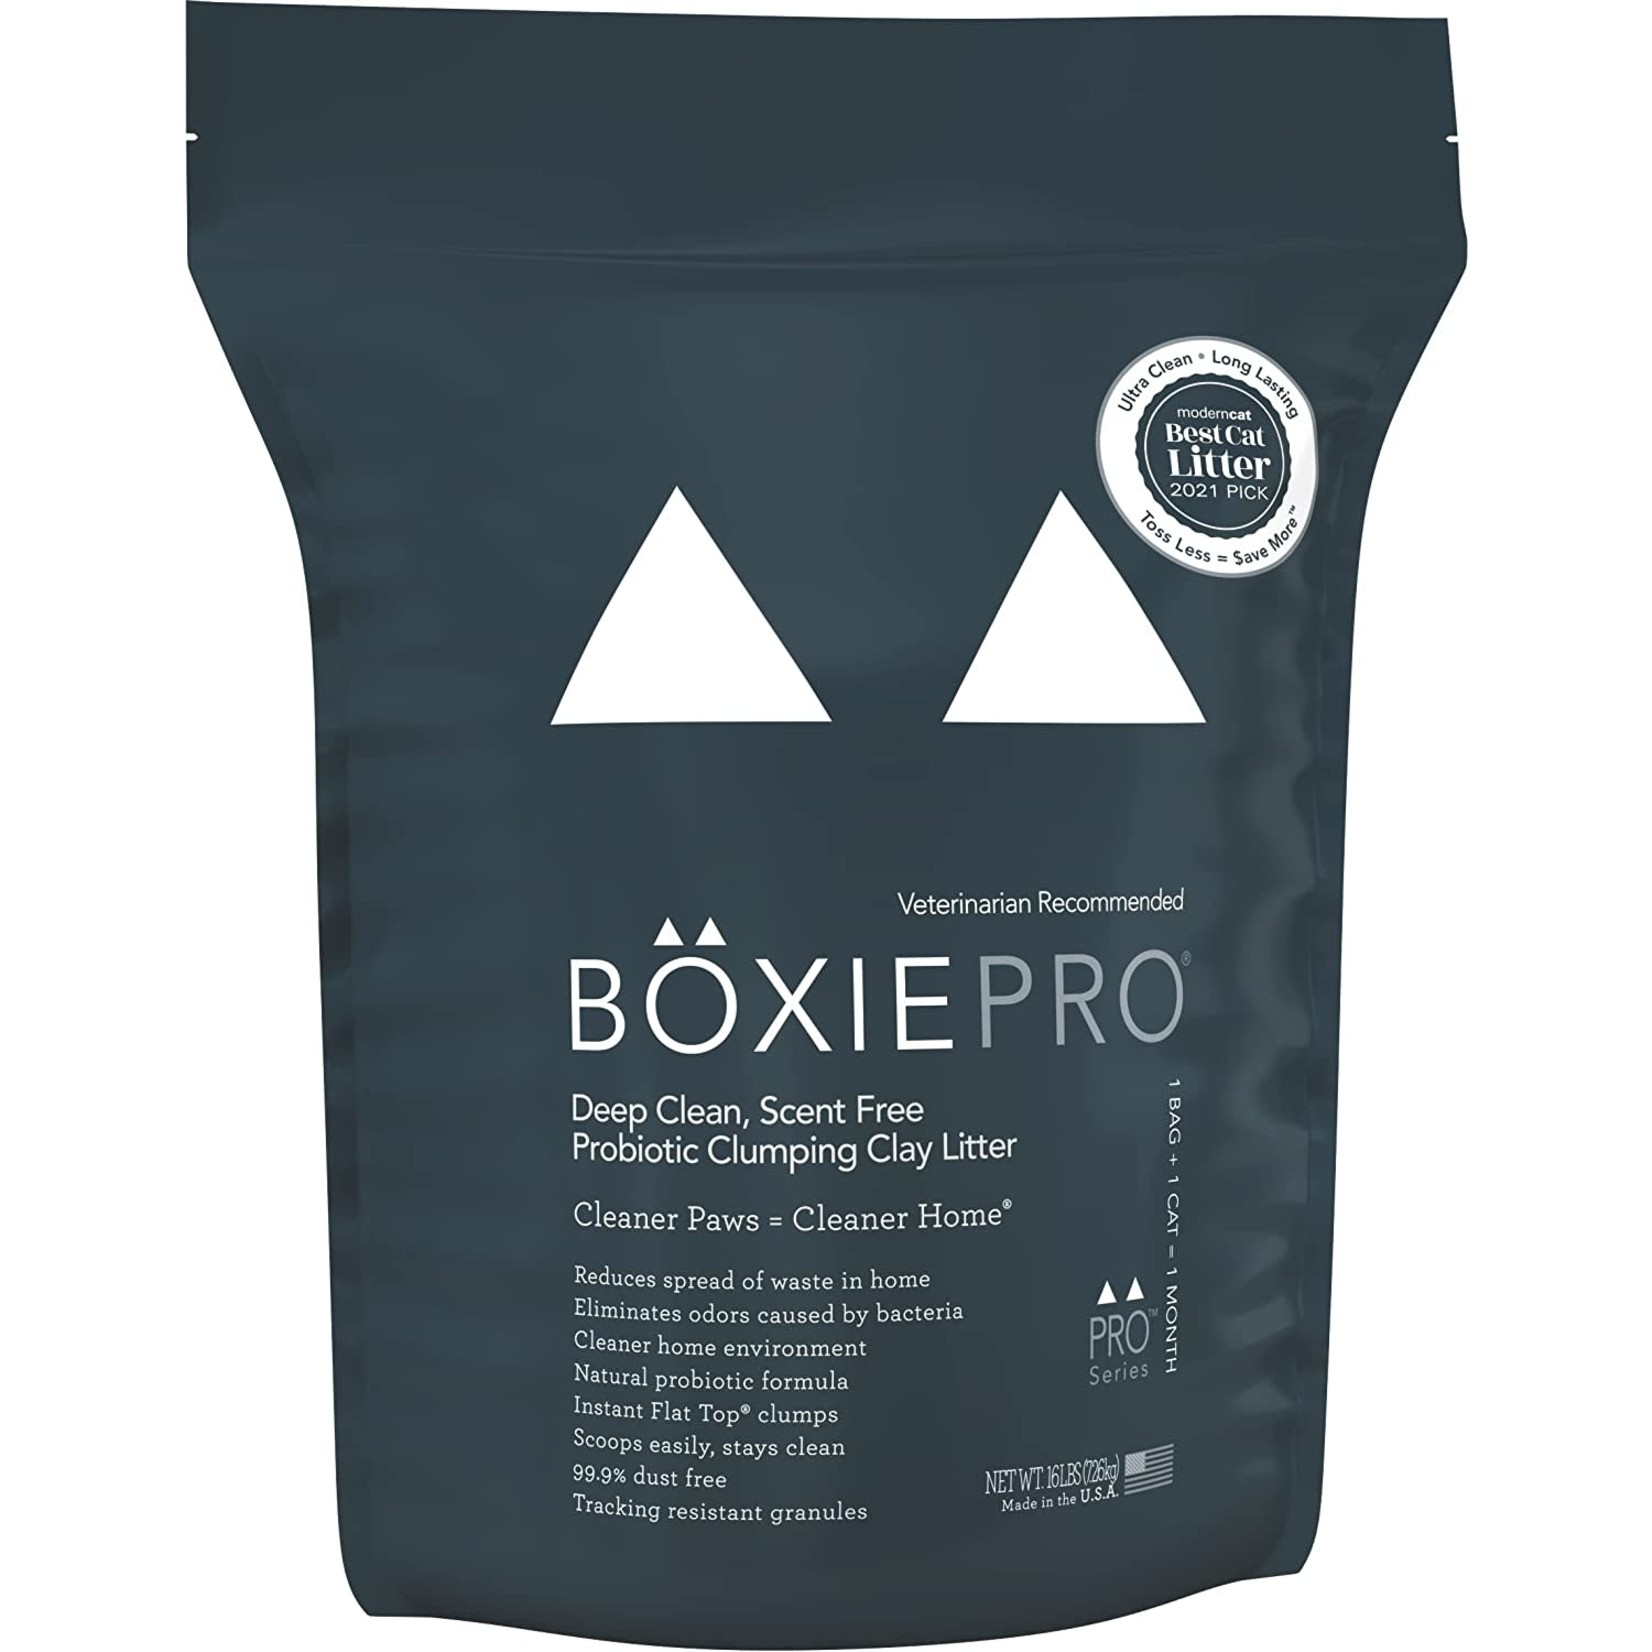 BoxiePro Deep Clean Scent Free Probiotic Clumping Cat Litter 16lb